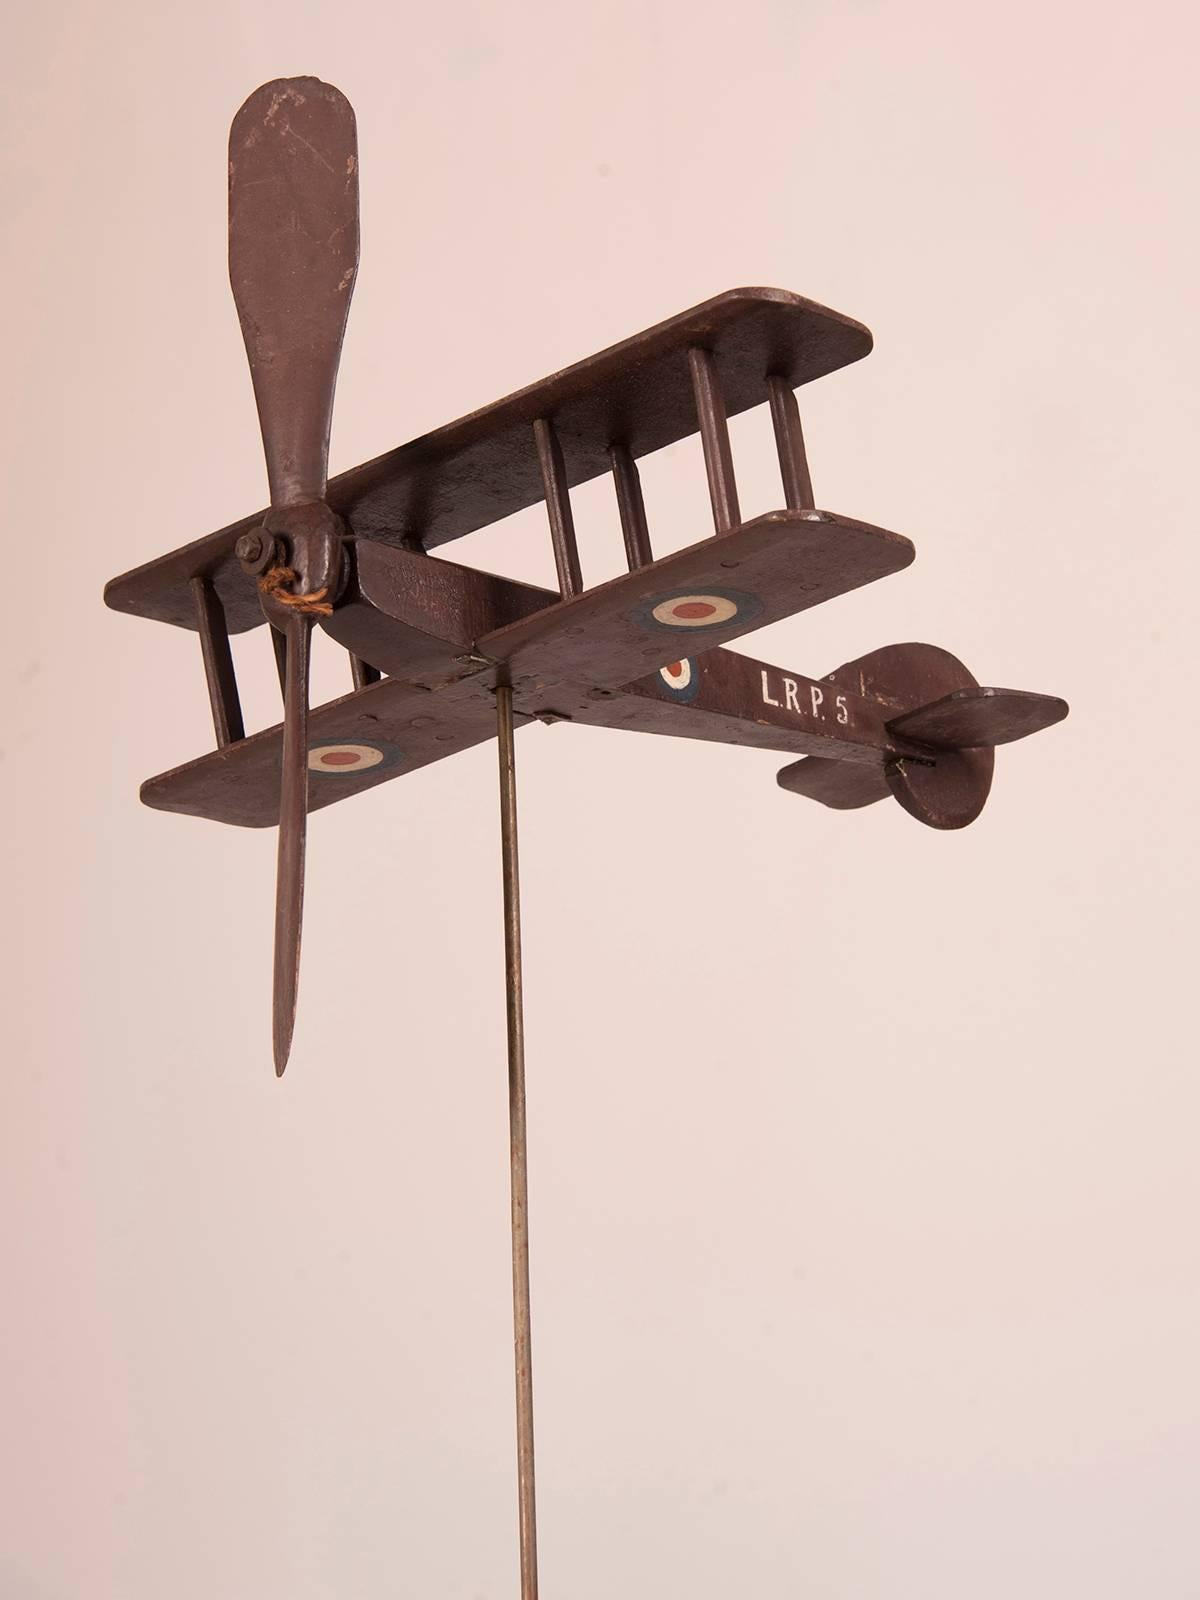 Iron Vintage English Hand-Carved and Painted Biplane, circa 1940